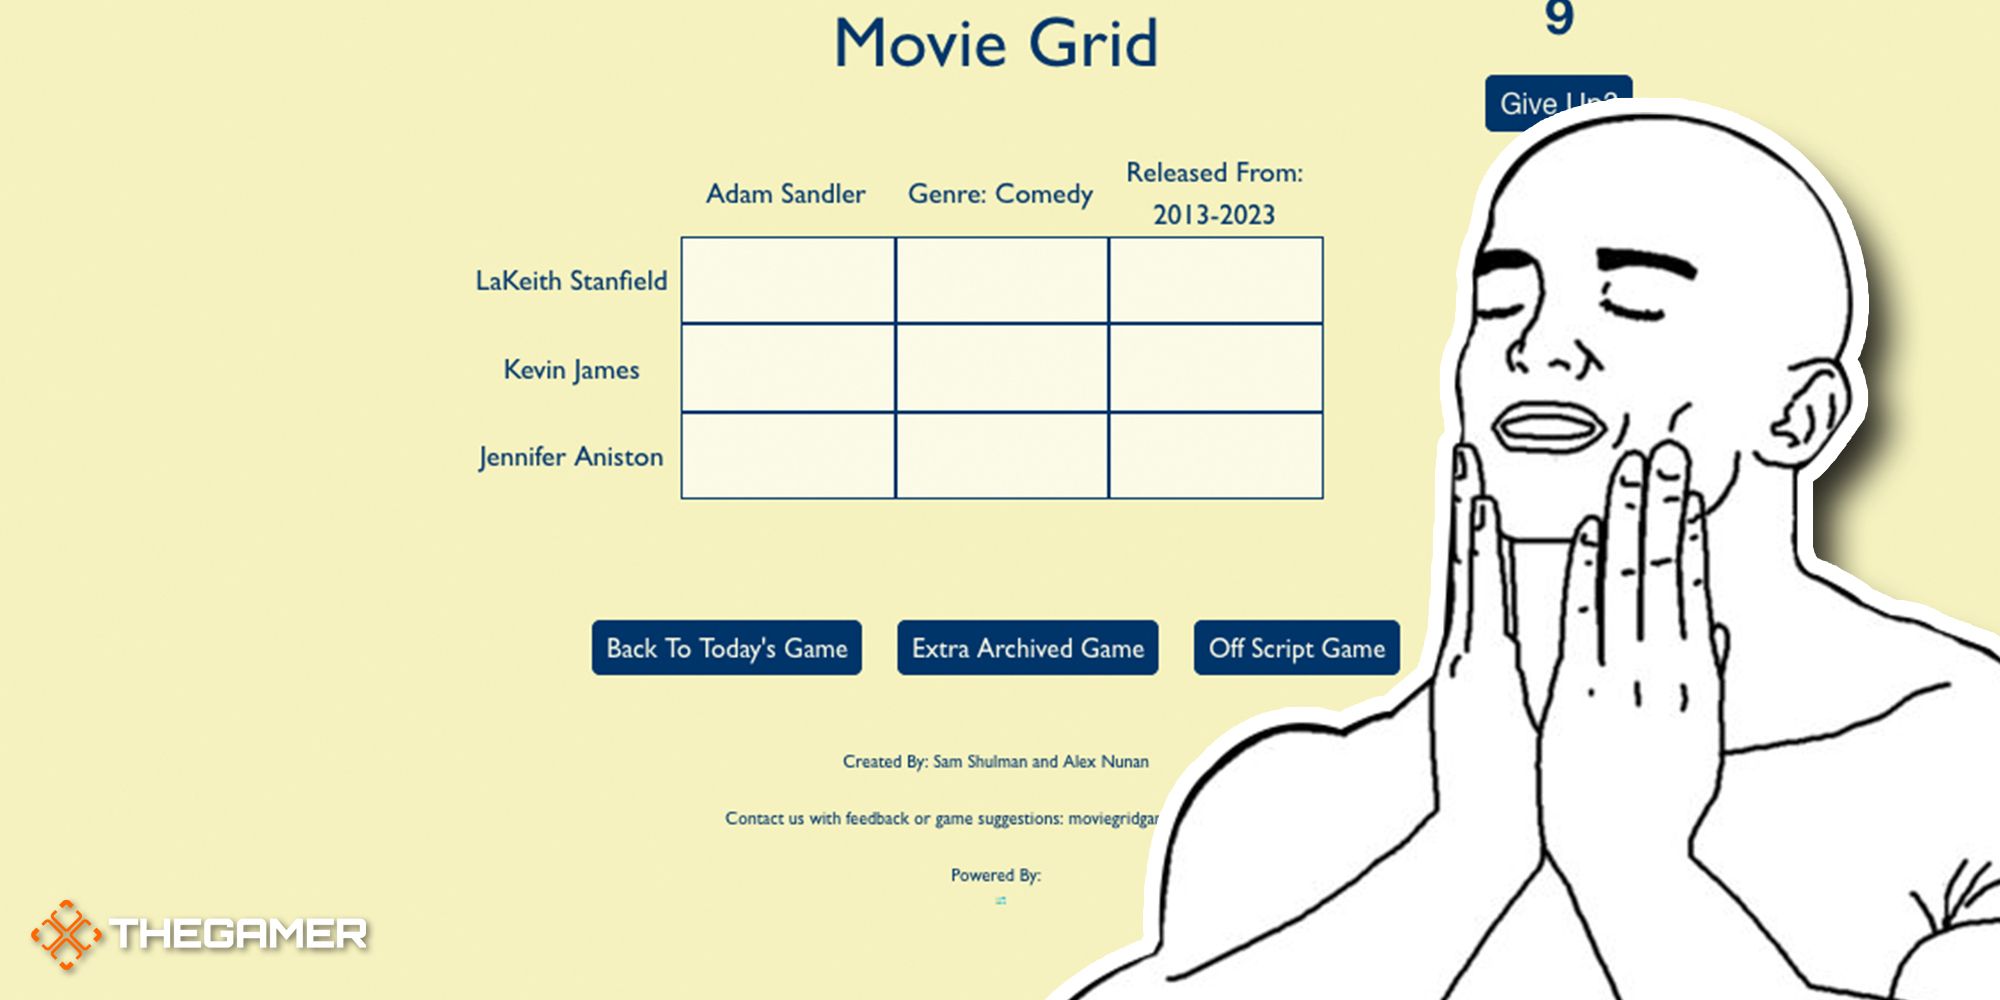 Feels Good meme of a man touching his face overlaid on Movie Grid gameplay screen.